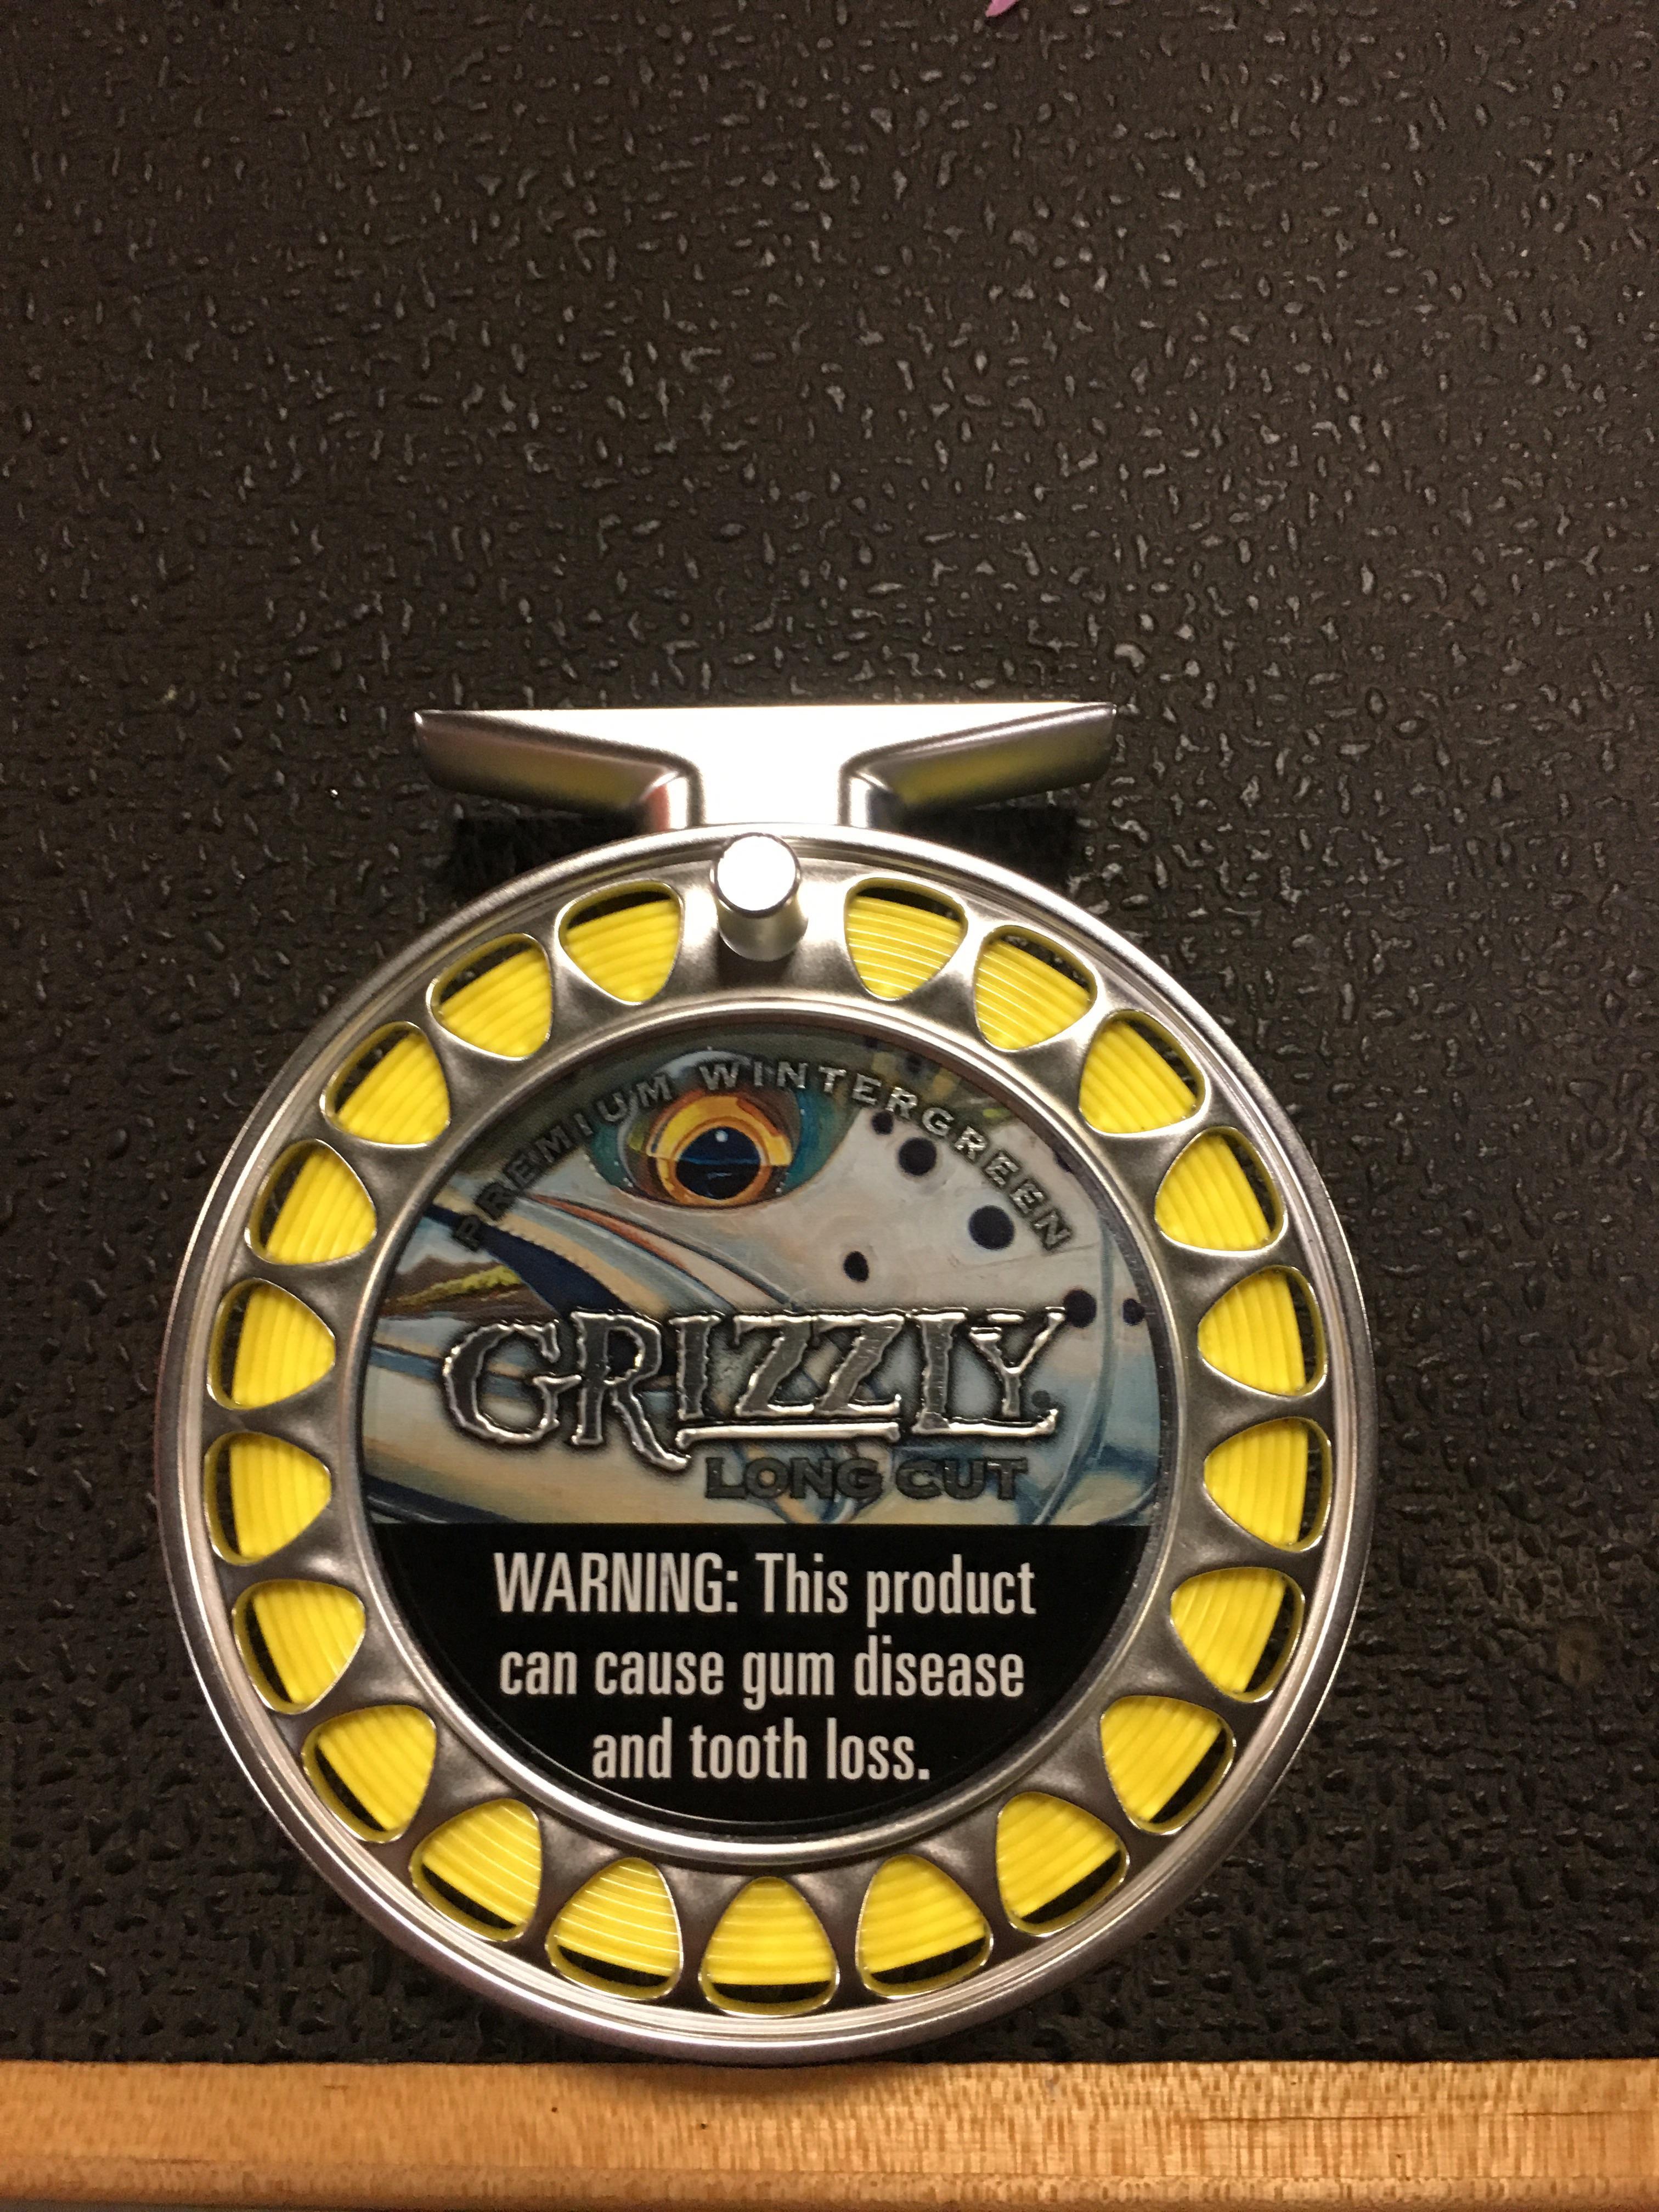 New Grizzly Tobacco Logo - New grizzly can holder : DippingTobacco